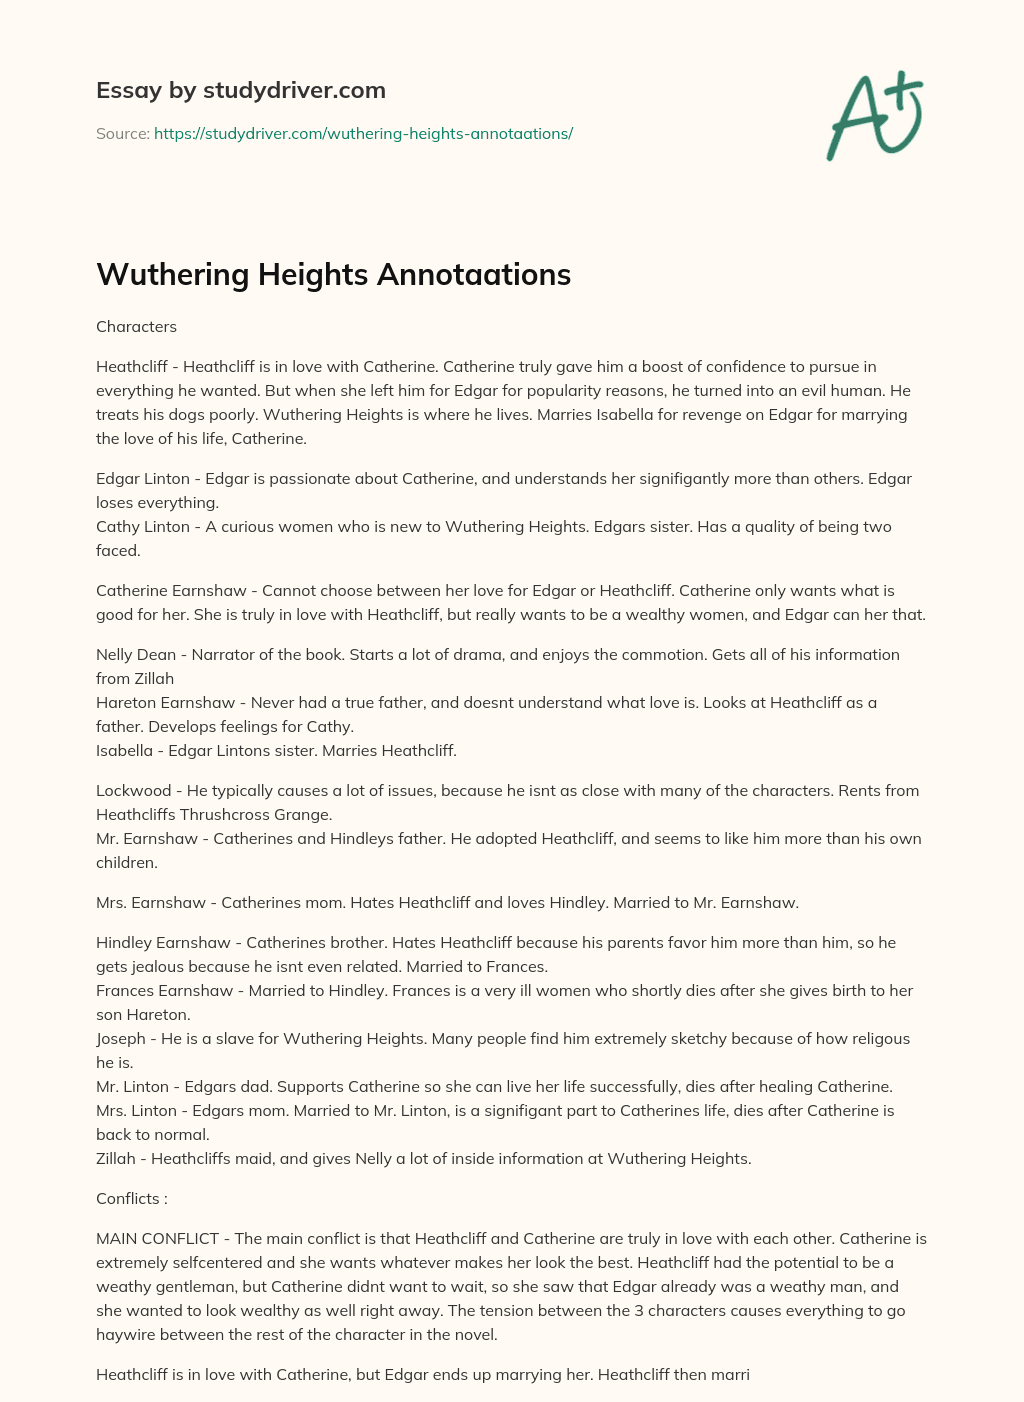 Wuthering Heights Annotaations essay